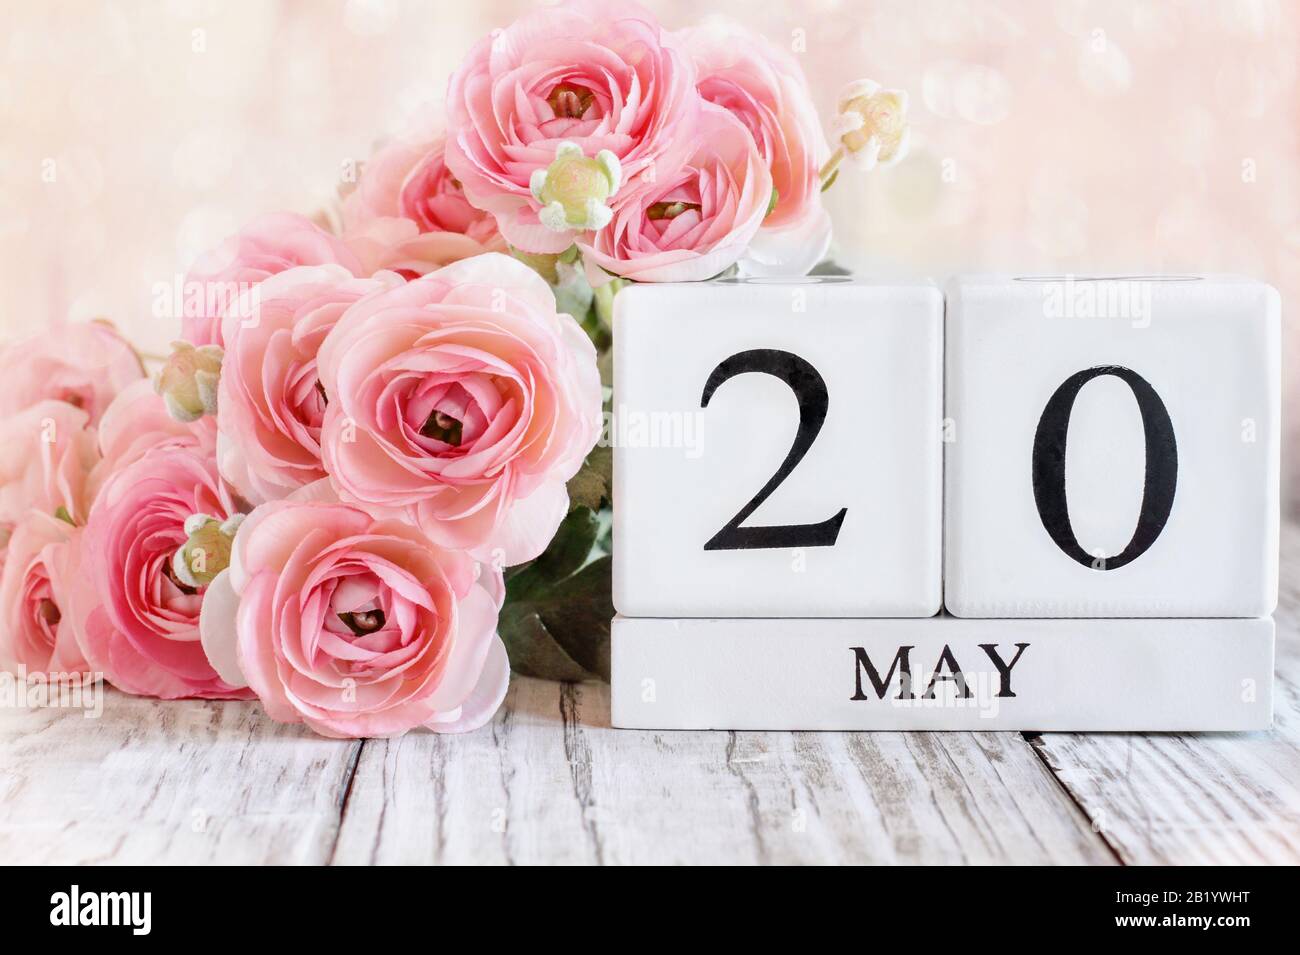 White wood calendar blocks with the date May 20th and pink ranunculus flowers over a wooden table. Selective focus with blurred background. Stock Photo